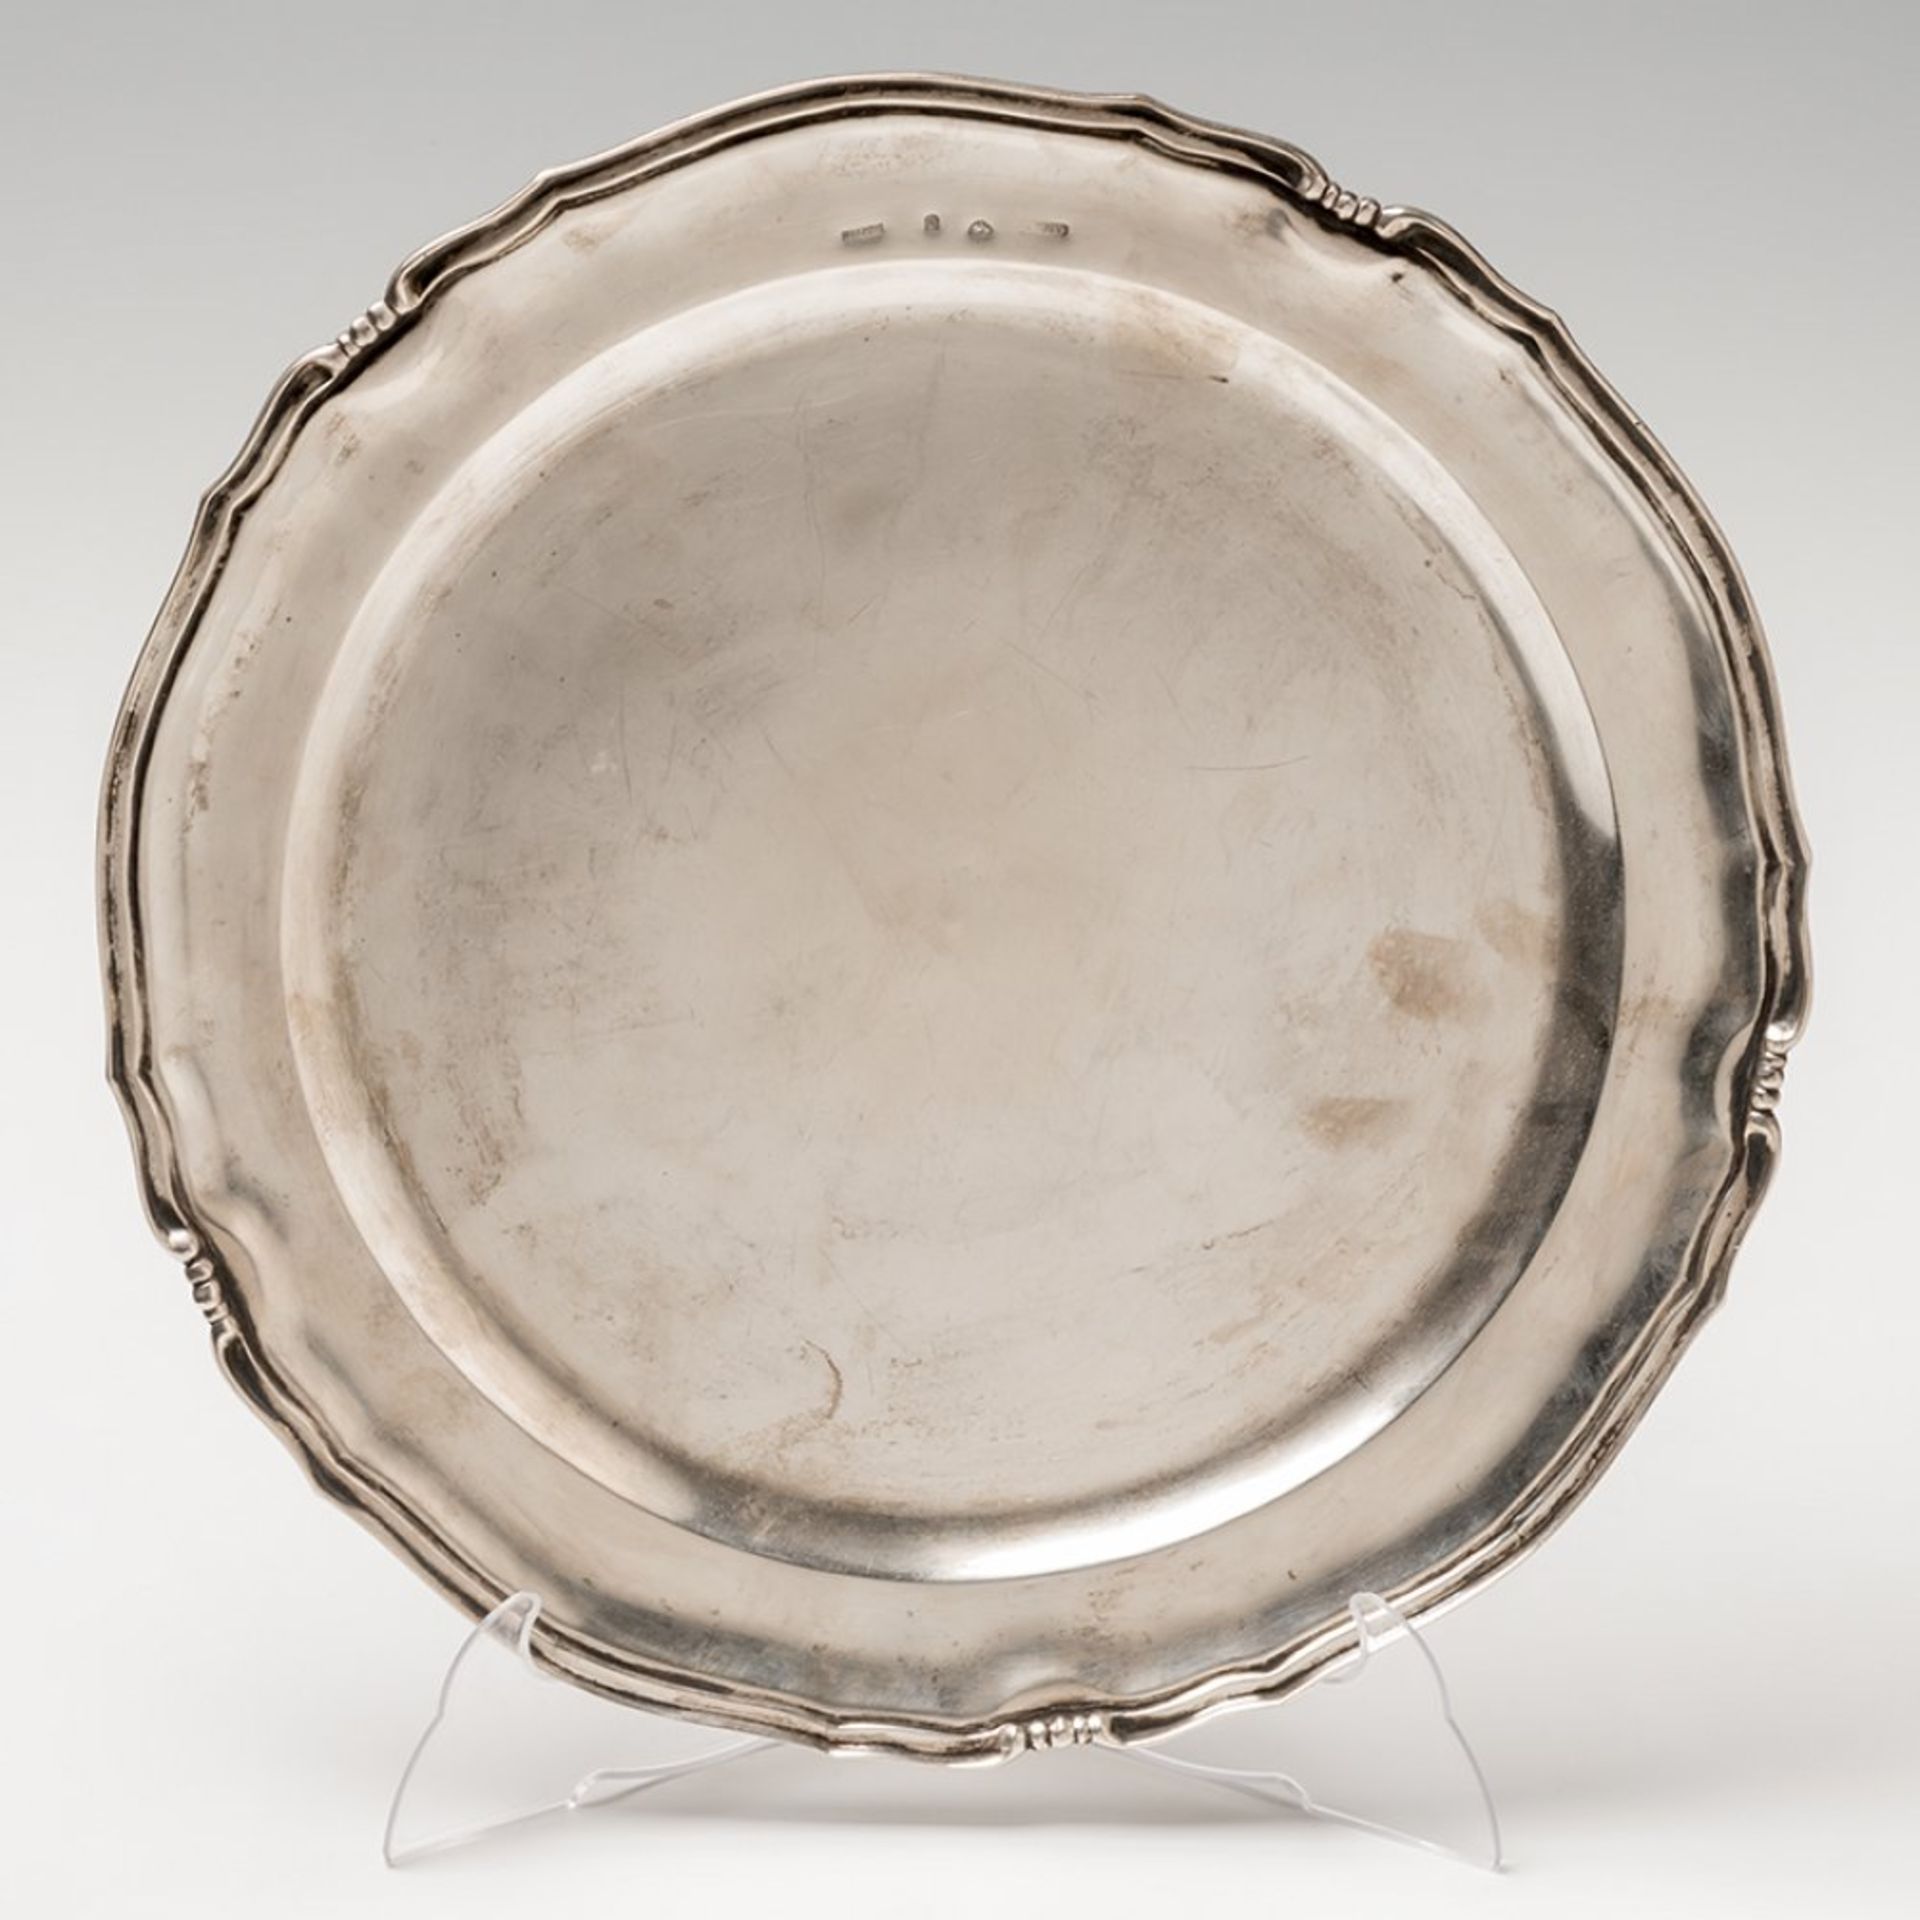 Under plate, trivet, in stamped silver. Mexico. S. XIXWeight: 779.6 g. Measure: 33 cm in diameter. - Image 5 of 5